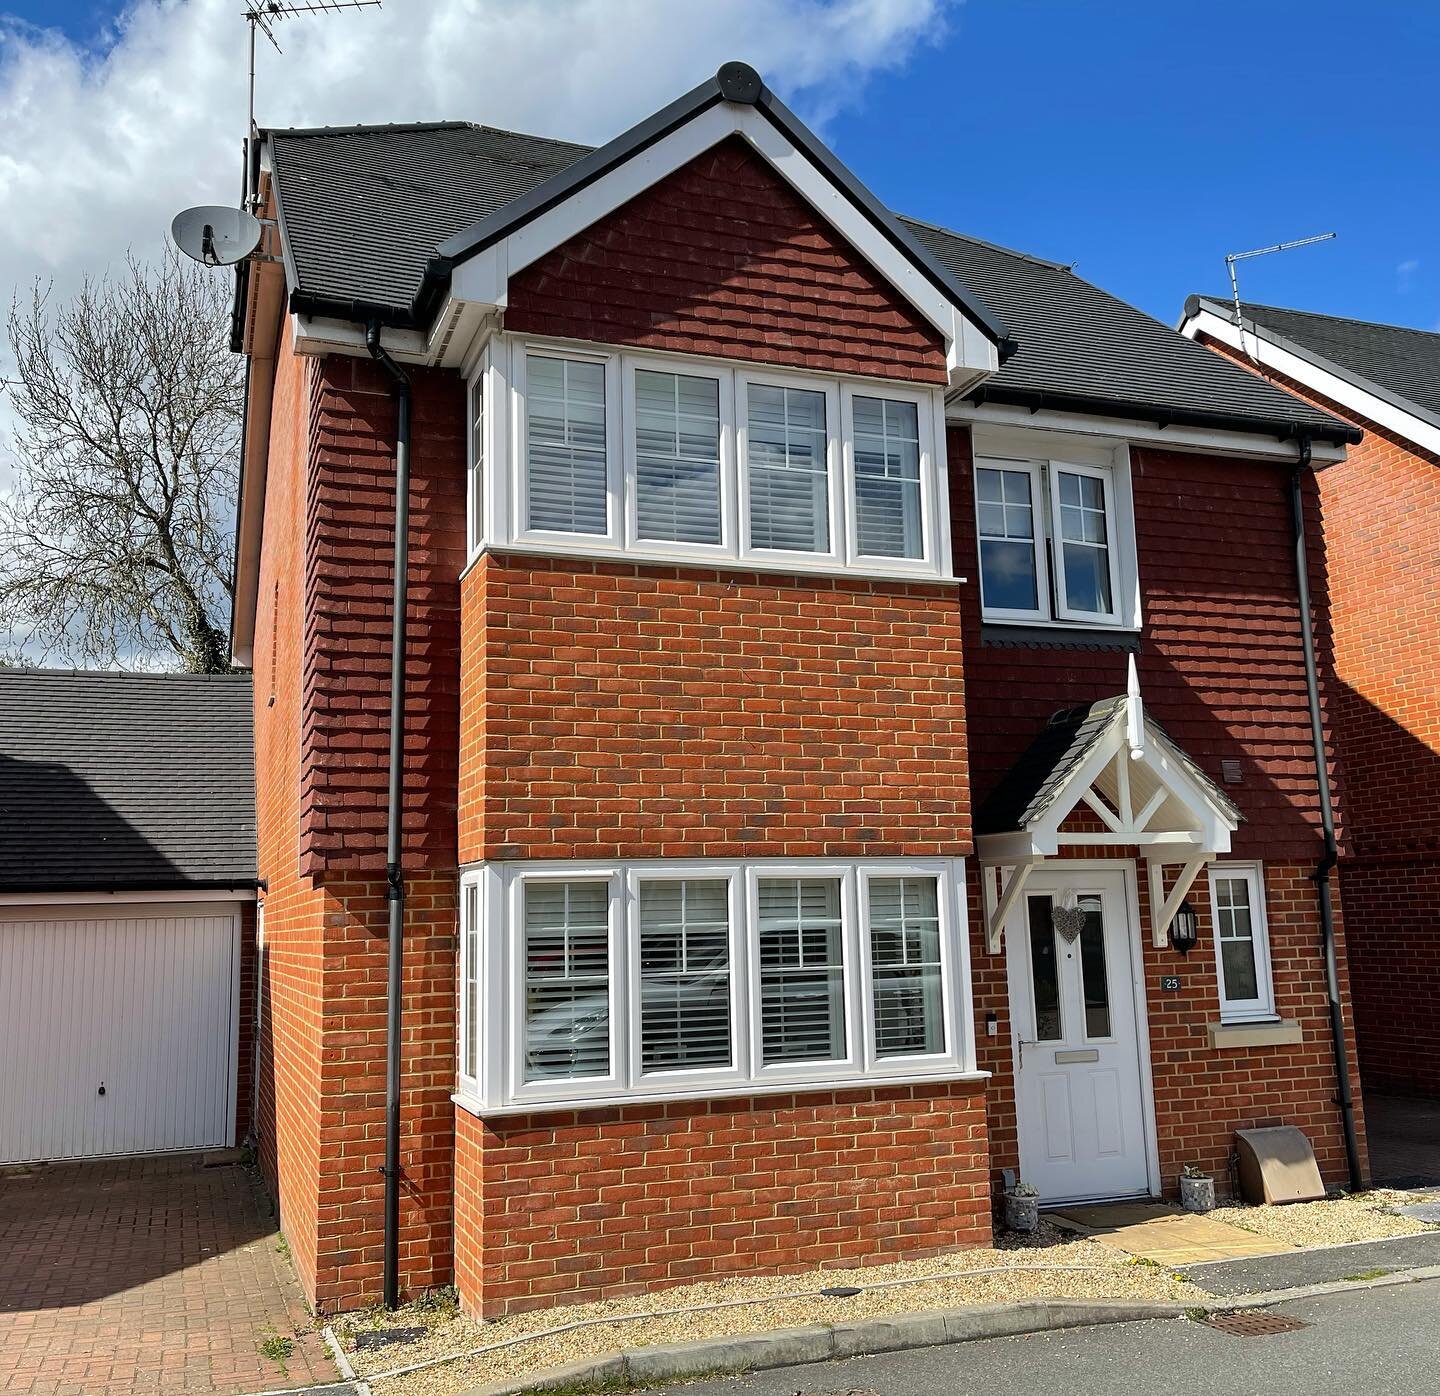 New instruction 🏡🥳

Walking distance to Farnham town centre, a three bedroom detached house built in 2014. Located to the south of Farnham in the desirable Wrecclesham. 

Beautifully finished throughout, spacious living accommodation with en-suite 